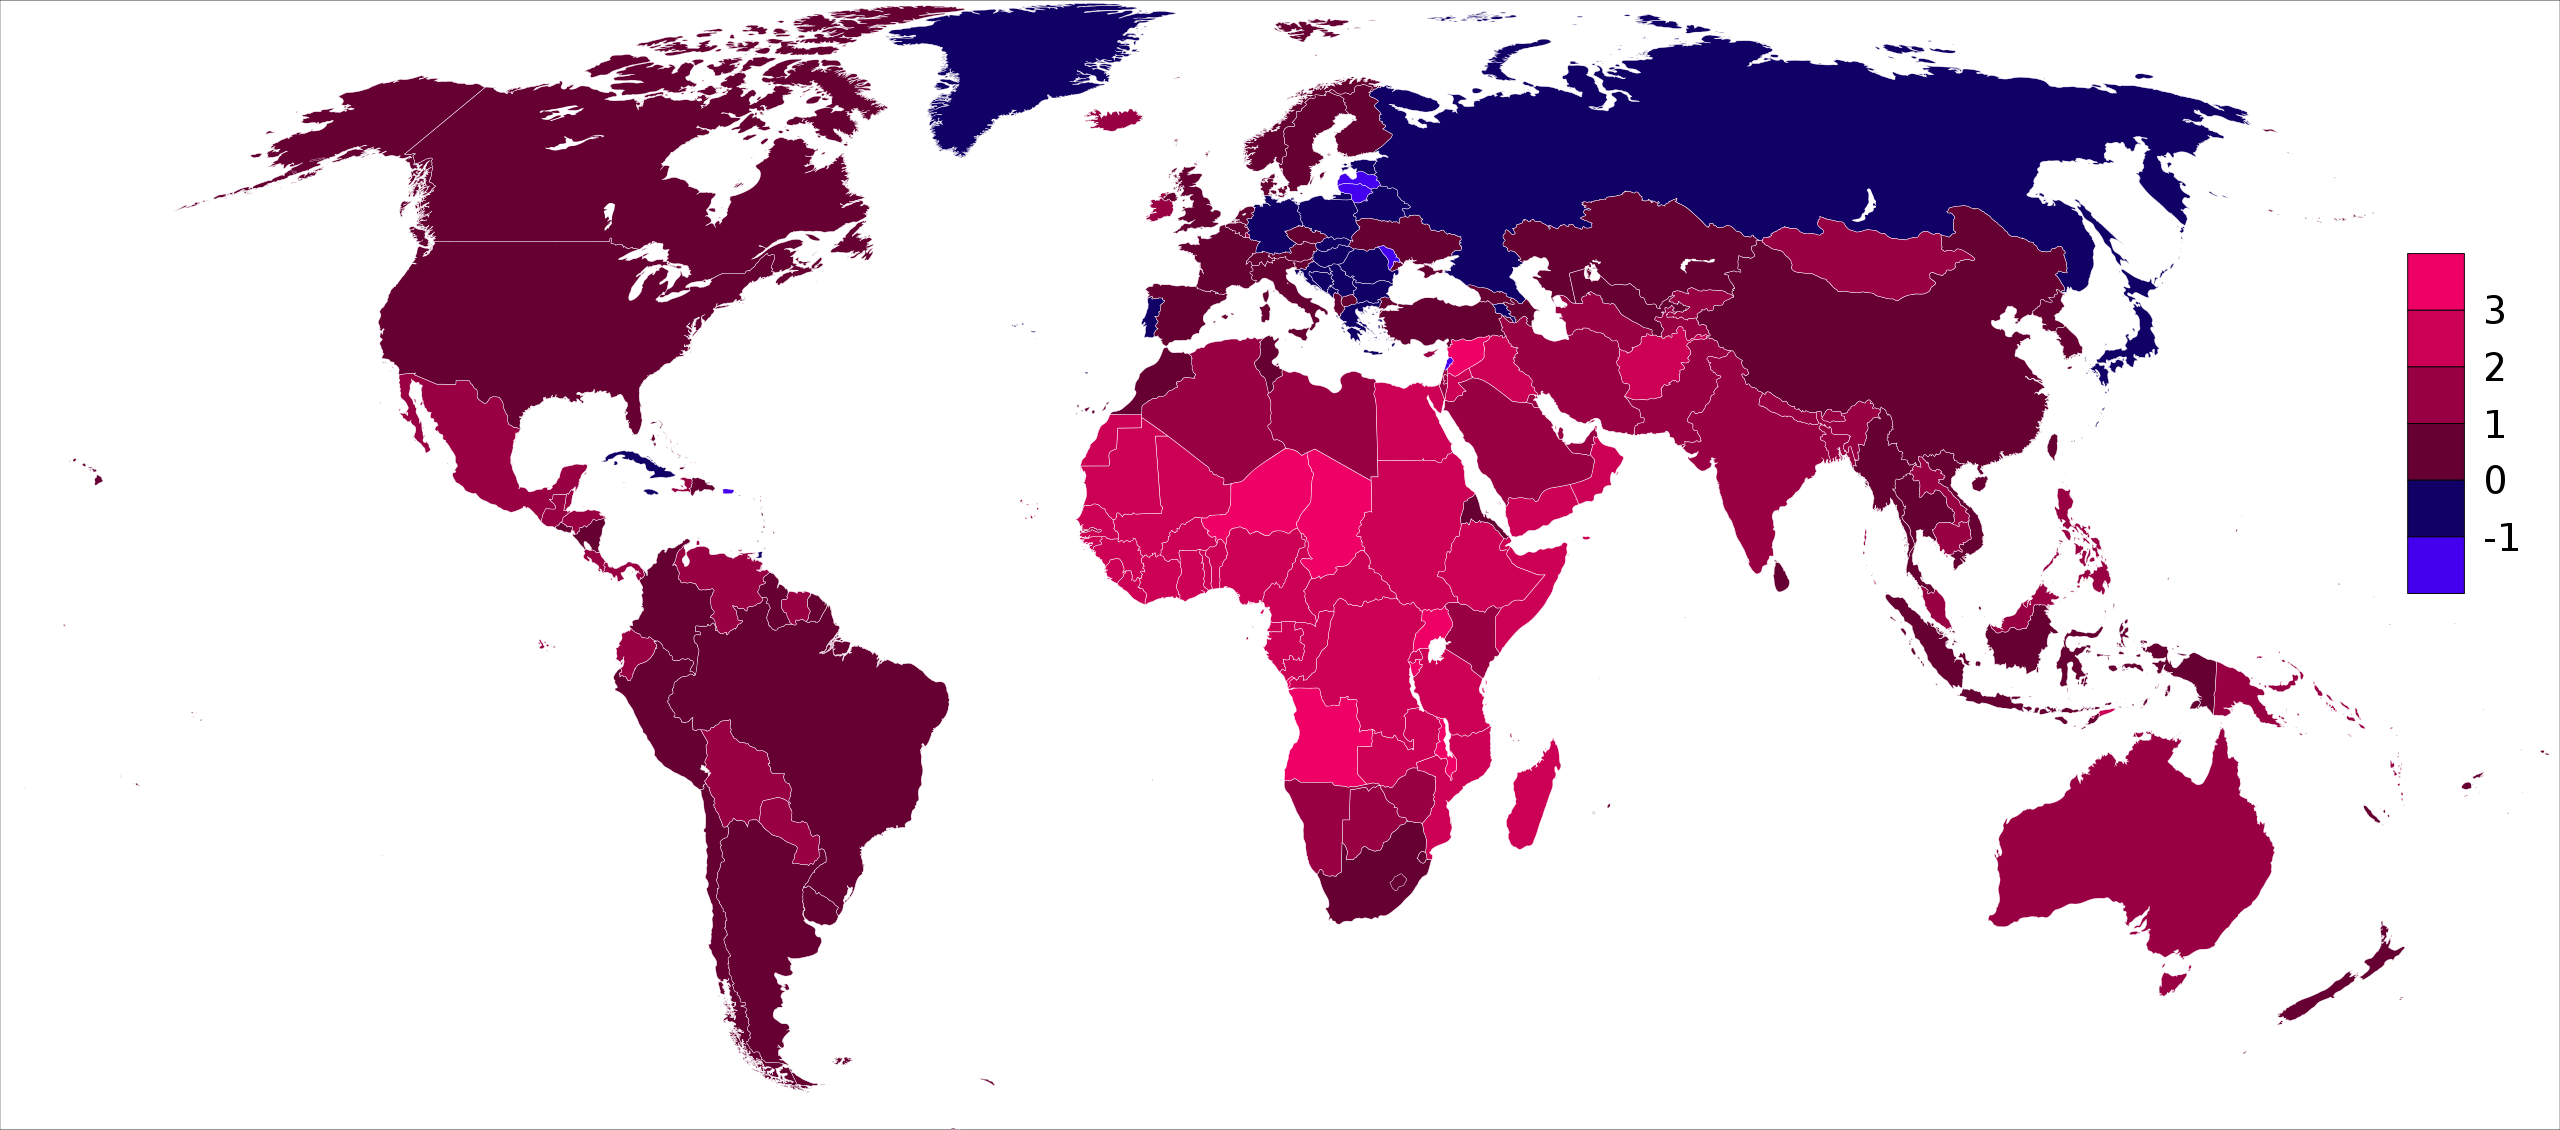 2560px-Population_growth_rate_world_2018.svg.png